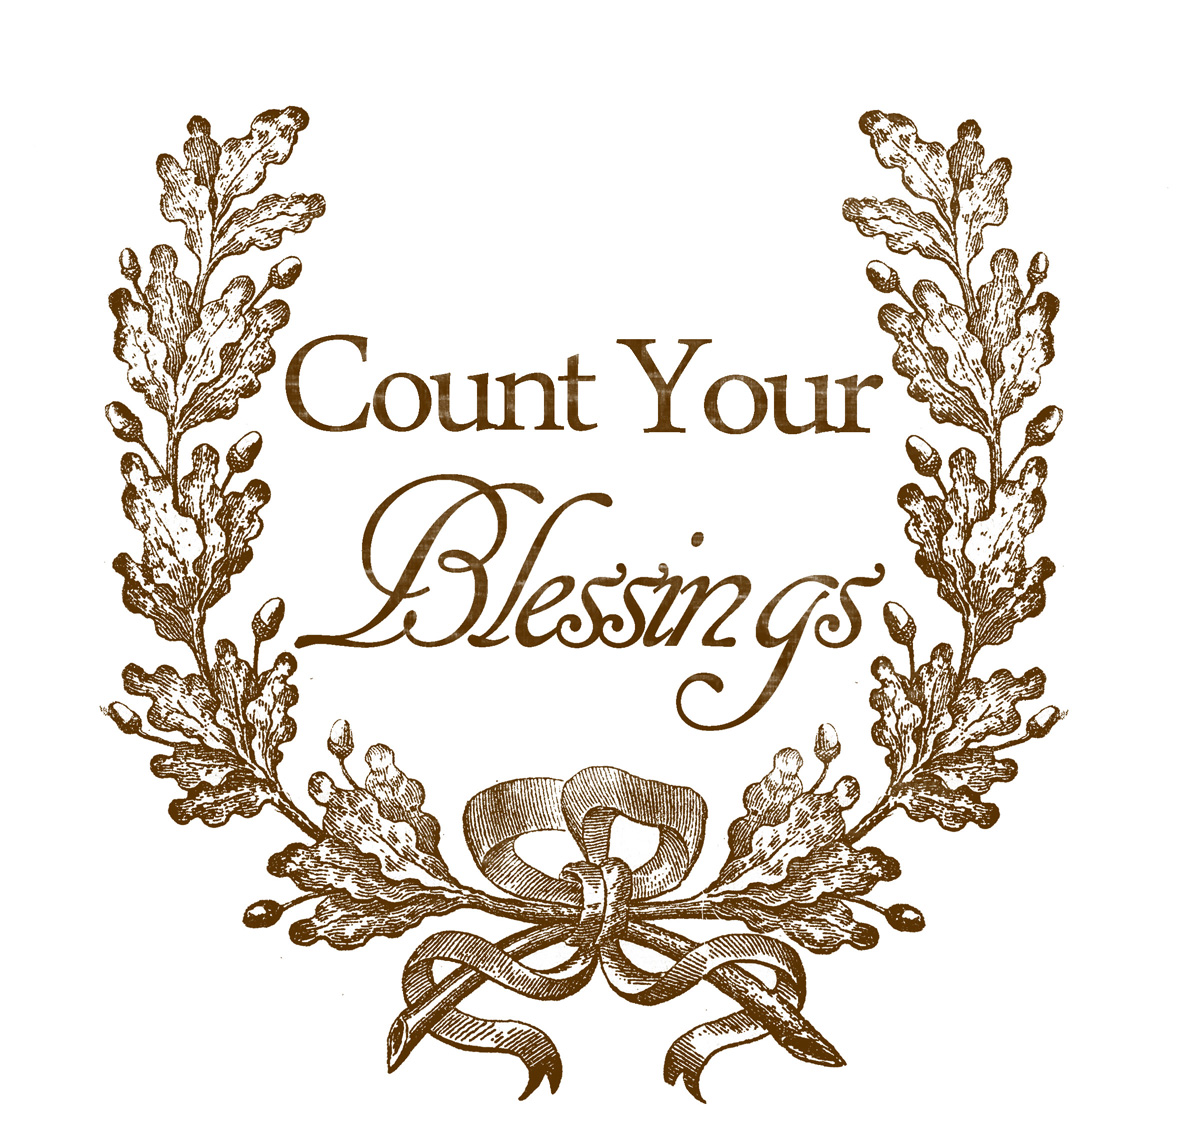 Blessings Clipart.